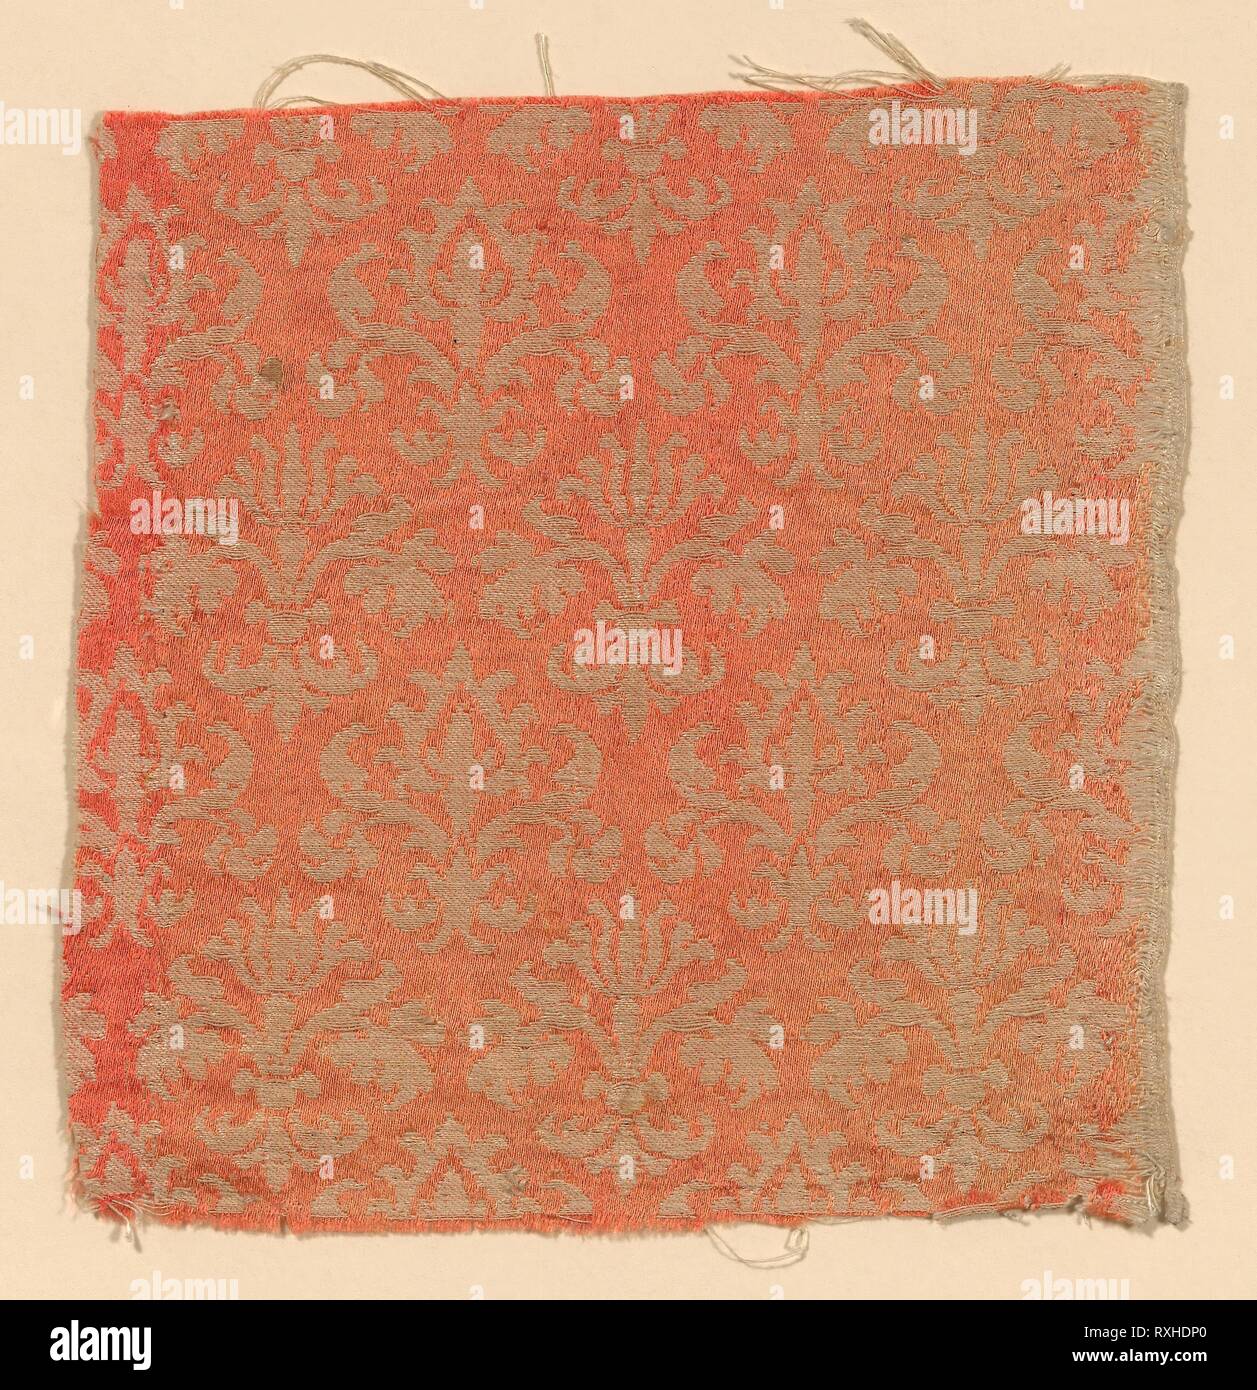 Fragment. Italy. Date: 1635-1650. Dimensions: 19 x 19 cm (7 1/2 x 7 1/2 in.). Silk, satin damask weave. Origin: Italy. Museum: The Chicago Art Institute. Stock Photo